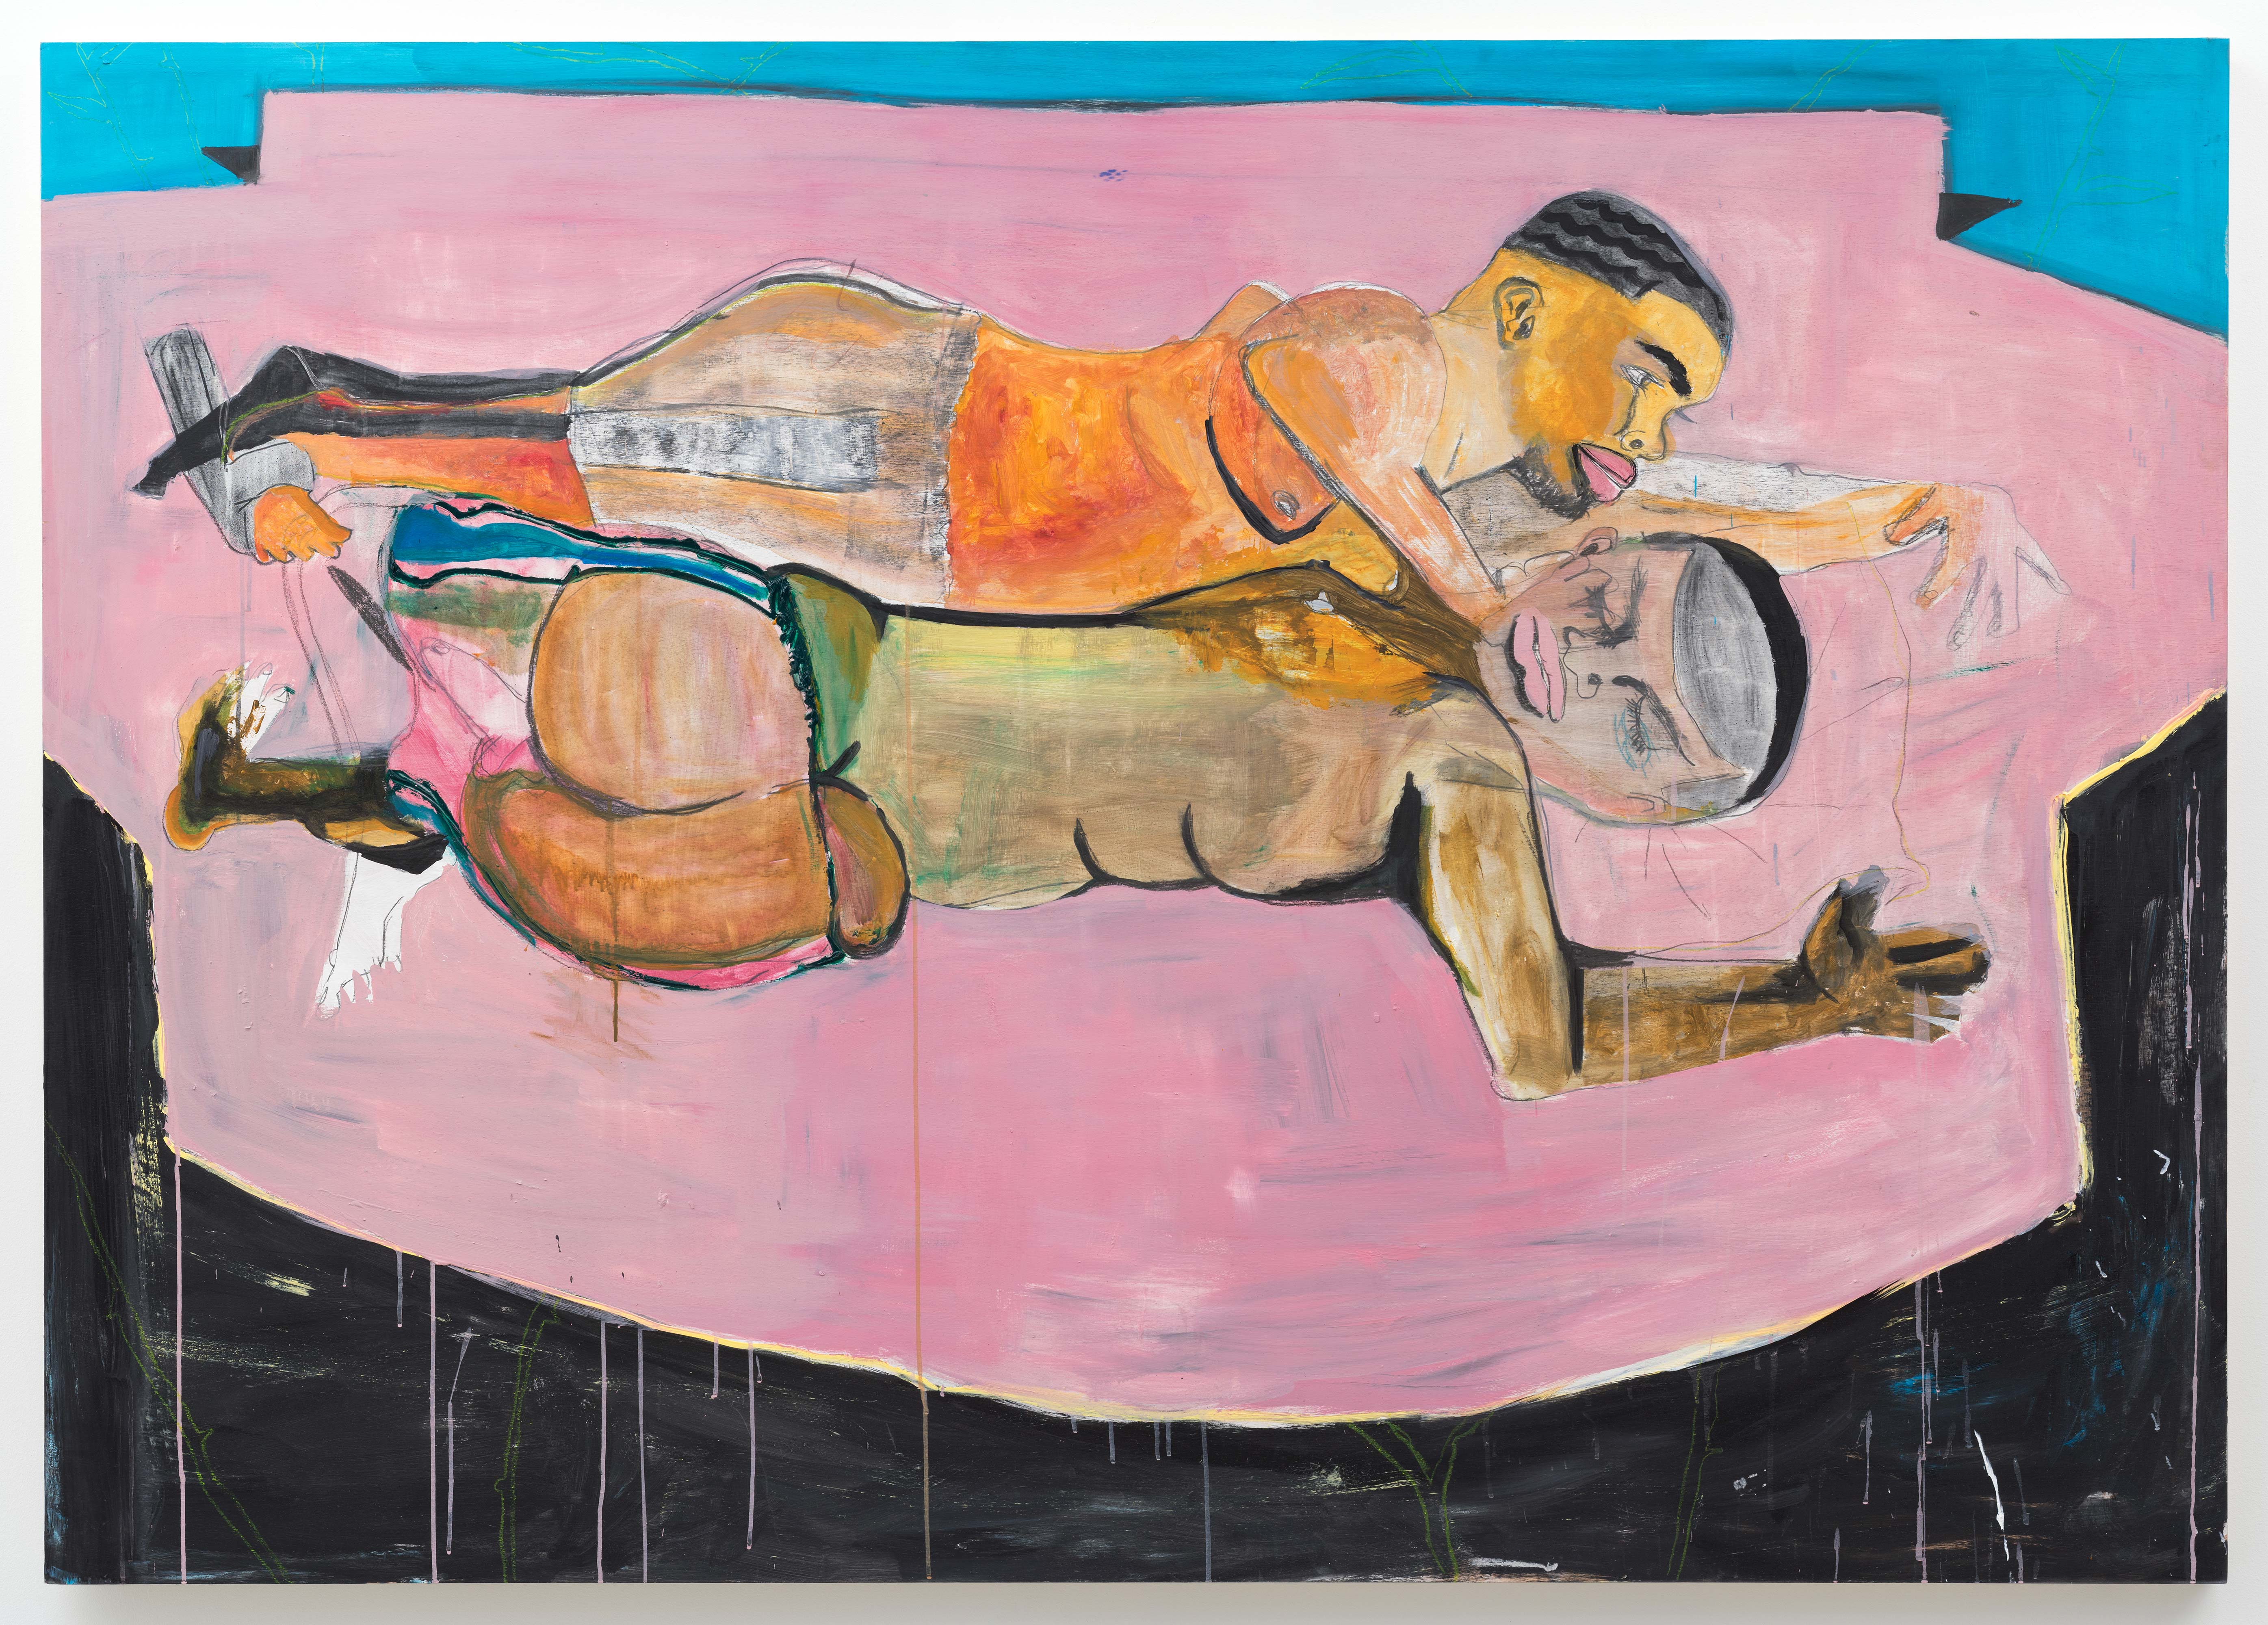 Jonathan Lyndon Chase<br>Two Men in Bed<br>2015<br>acrylic on panel<br>60 x 84 in (152.4 x 213.4 cm)